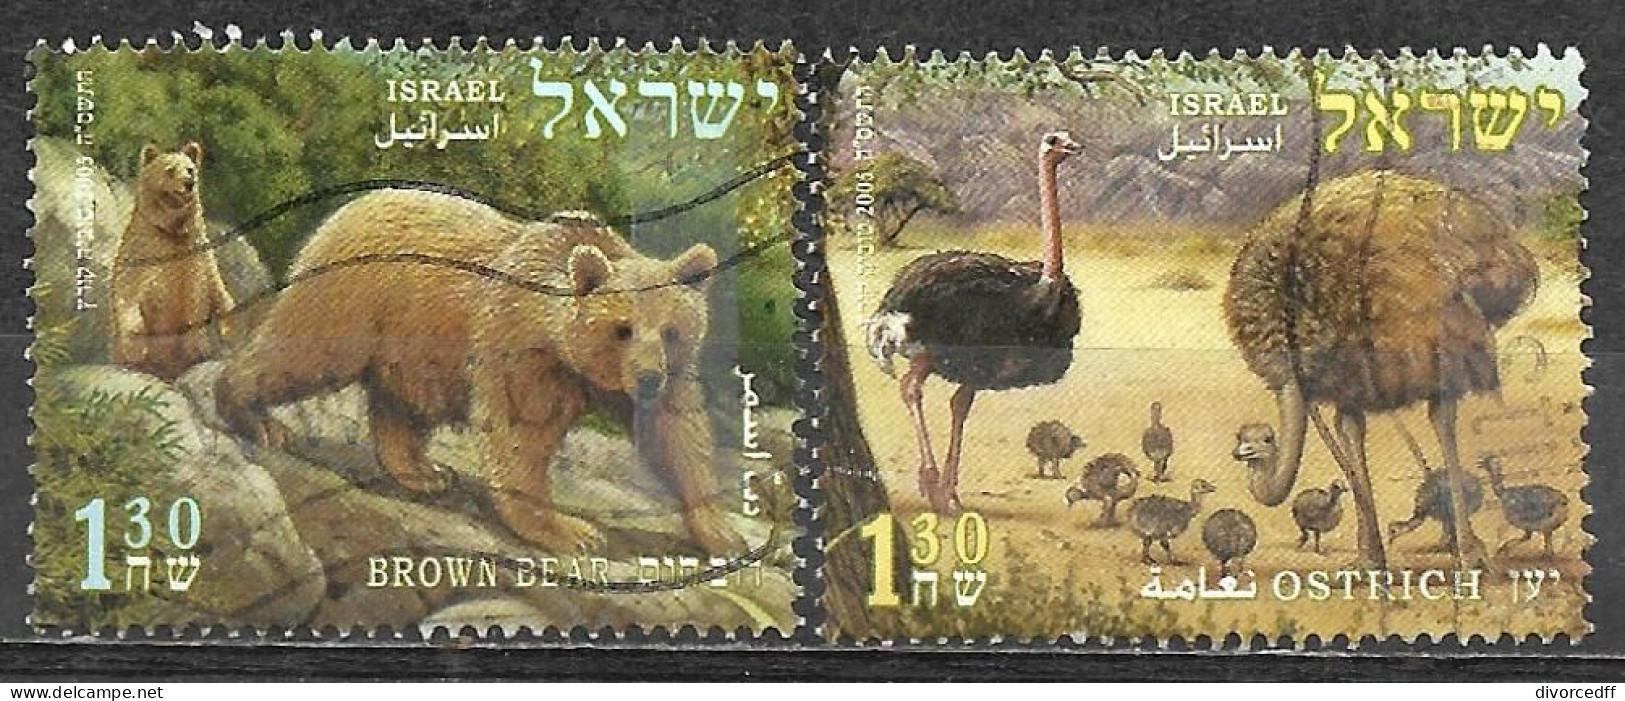 Israel 2005 Used Stamps Animals From The Bible Bear Ostrich [INLT19] - Oblitérés (sans Tabs)